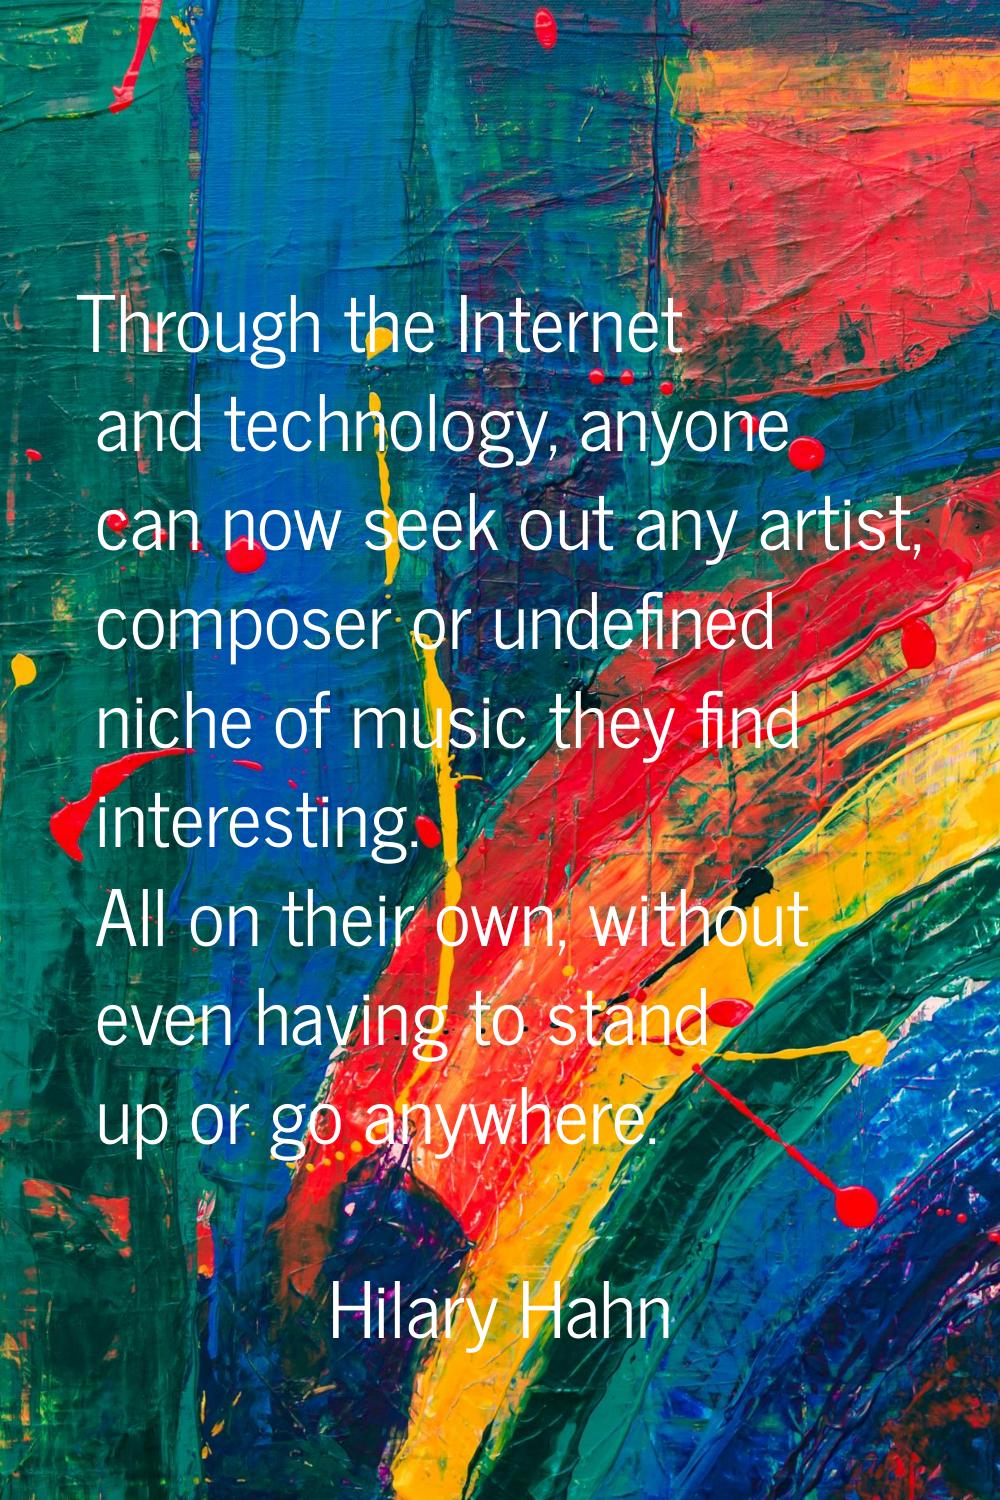 Through the Internet and technology, anyone can now seek out any artist, composer or undefined nich